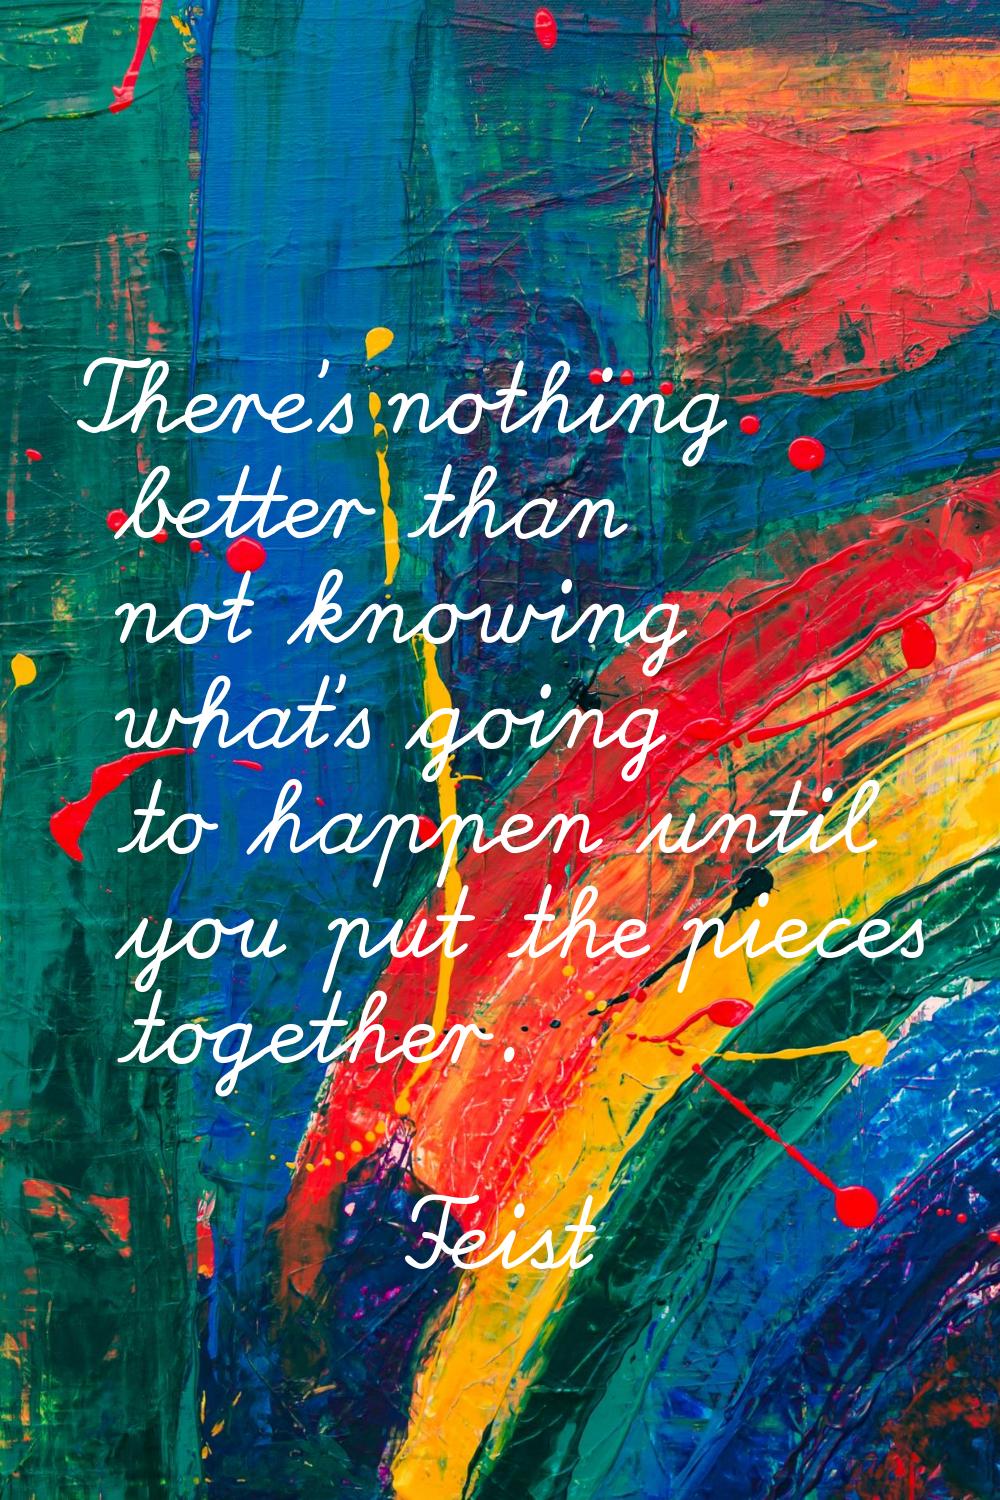 There's nothing better than not knowing what's going to happen until you put the pieces together.